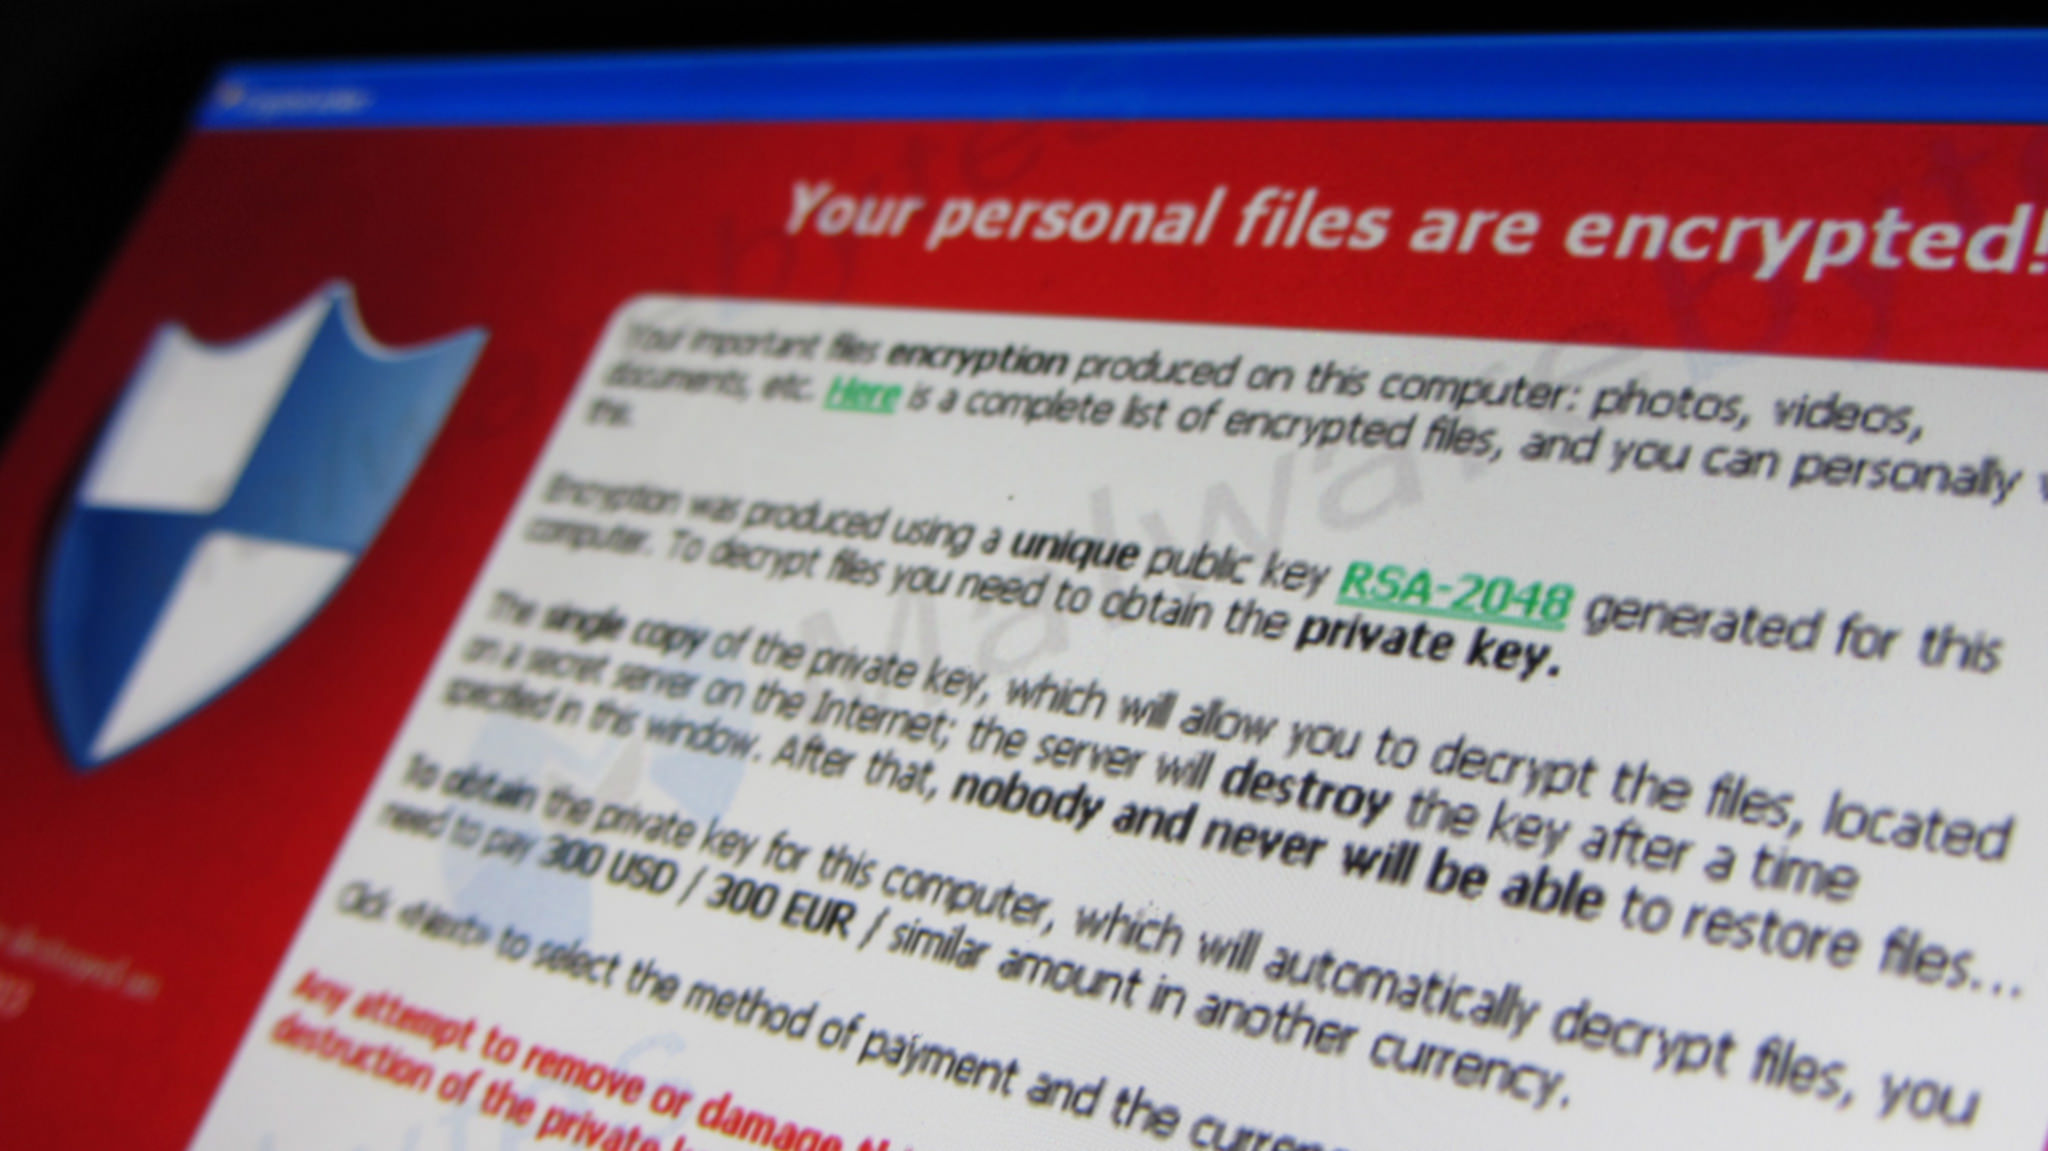 This message is displayed when an user is infected with the Cryptolocker ransomware. If the user doesn't pay the 'ransom' the user's files are gone. Screen of Cryptolocker via Malwarebytes.